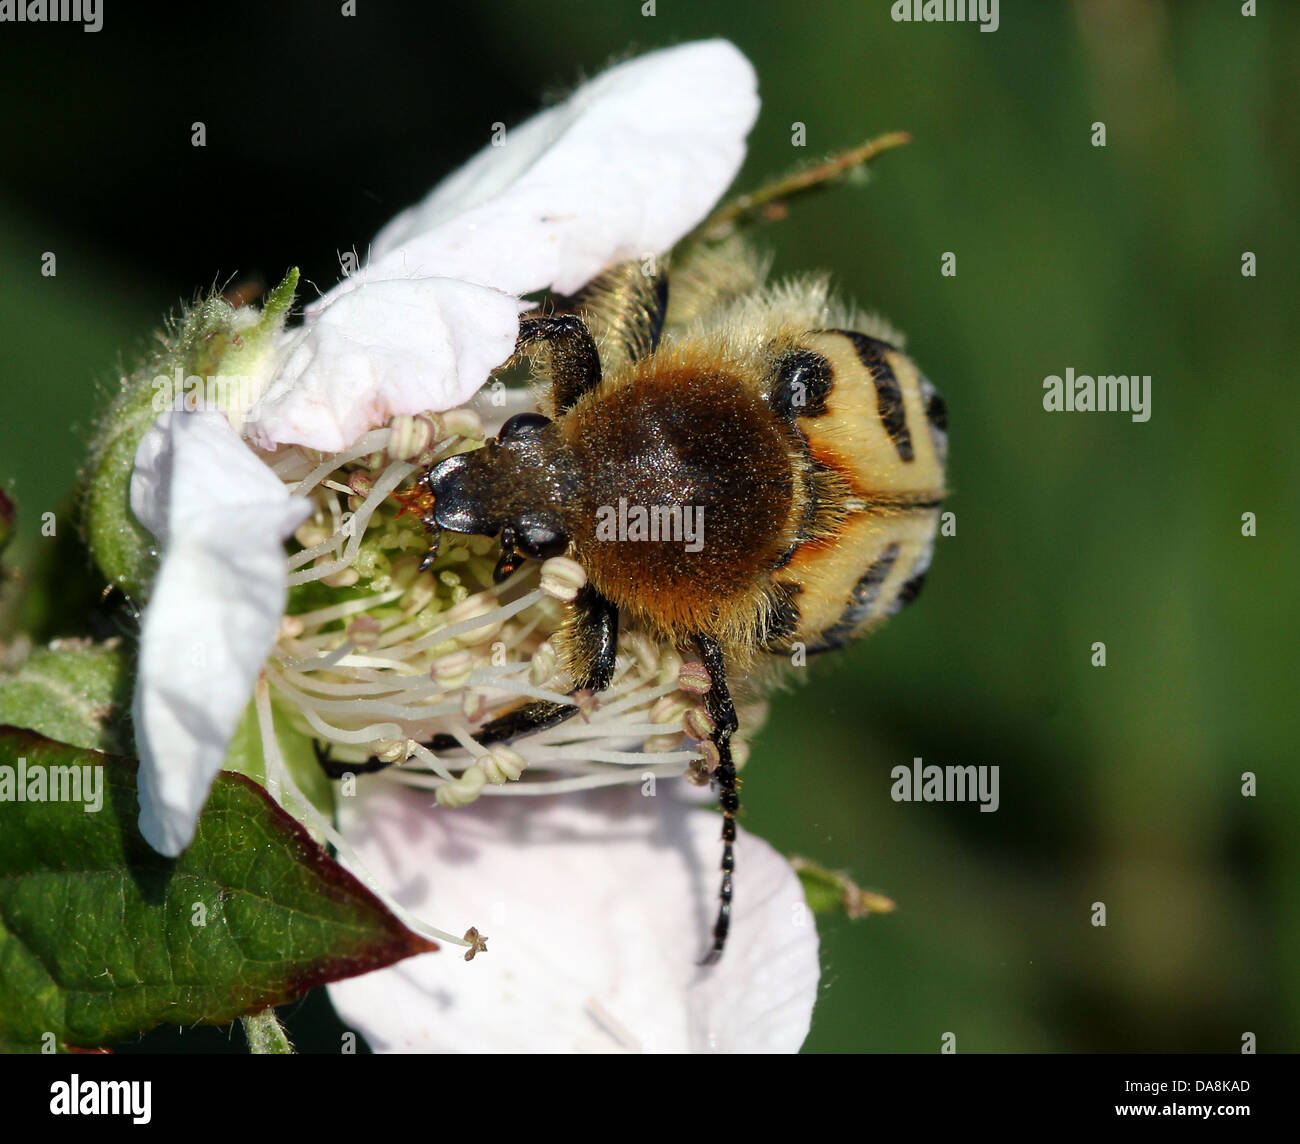 Close-up of  a Bee Beetle (Trichius zonatus or T. fasciatus) feeding on blackberry flowers - over 30 images in series Stock Photo